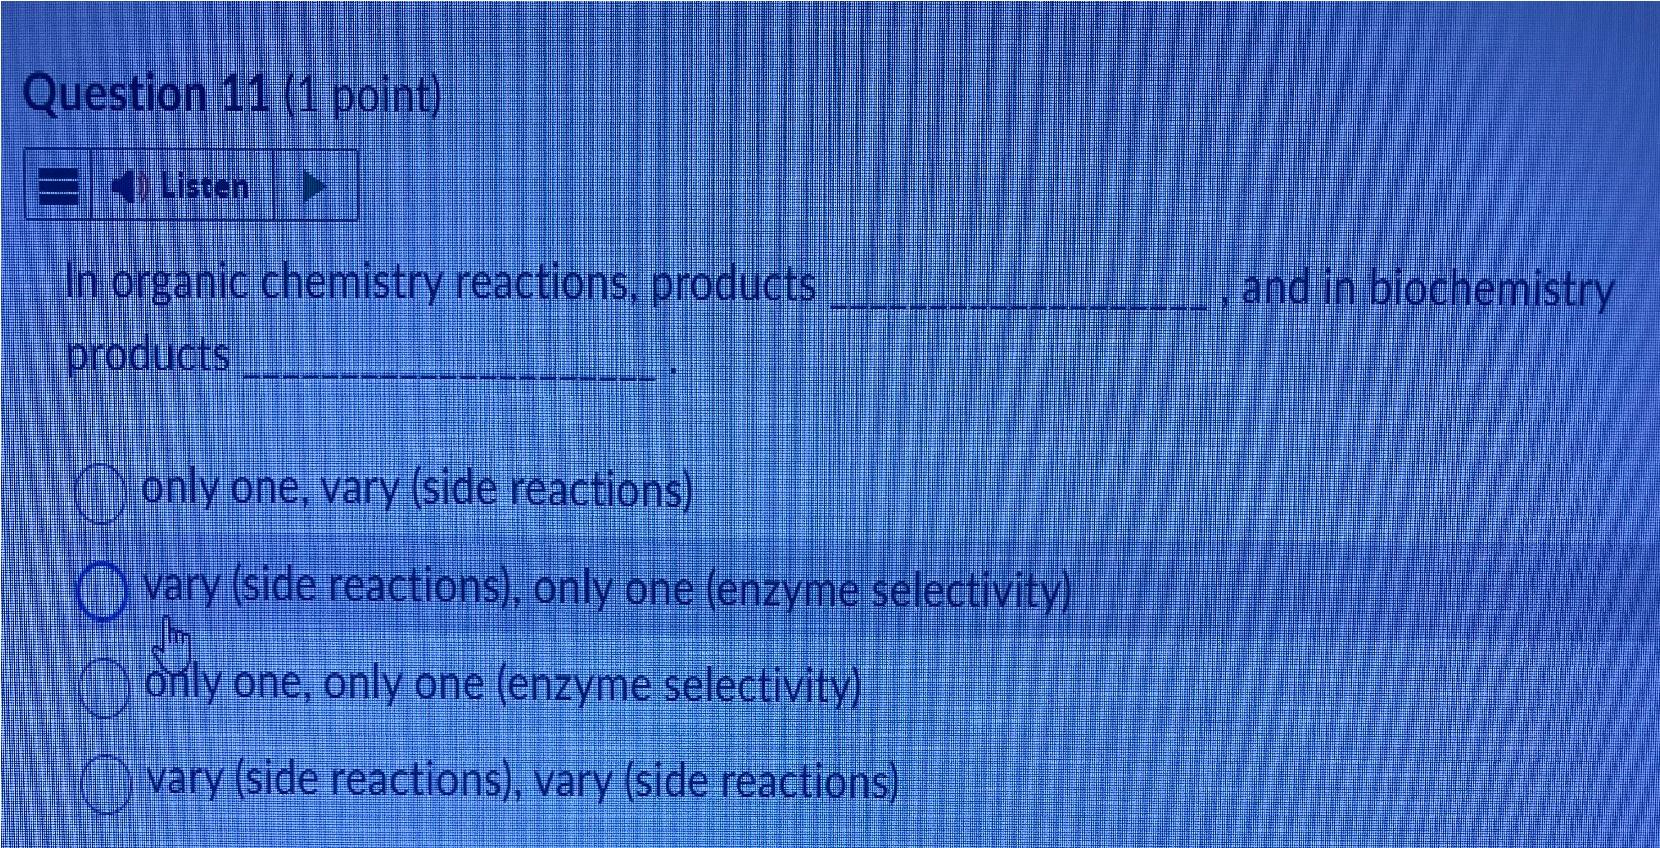 In organic chemistry reactions, products and in biochemistry products
only one, vary (side reactions)
vary (side reactions), 